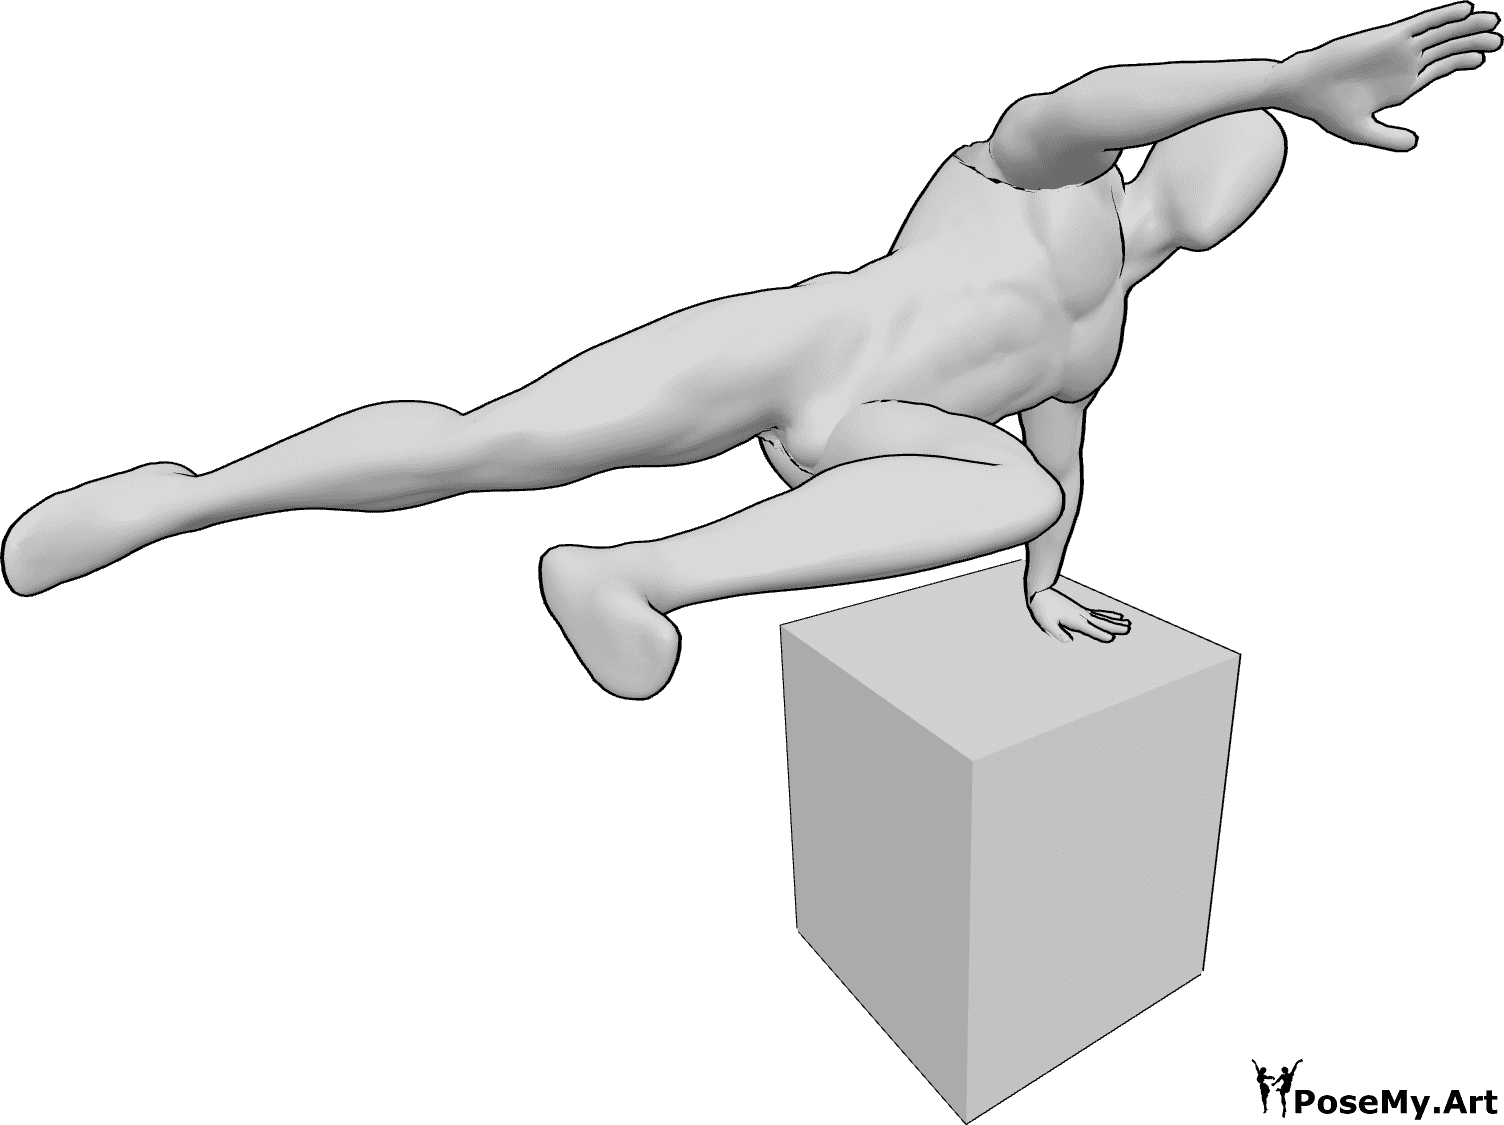 Pose Reference- Jumping around an obstacle - A realistic model jumping around an obstacle